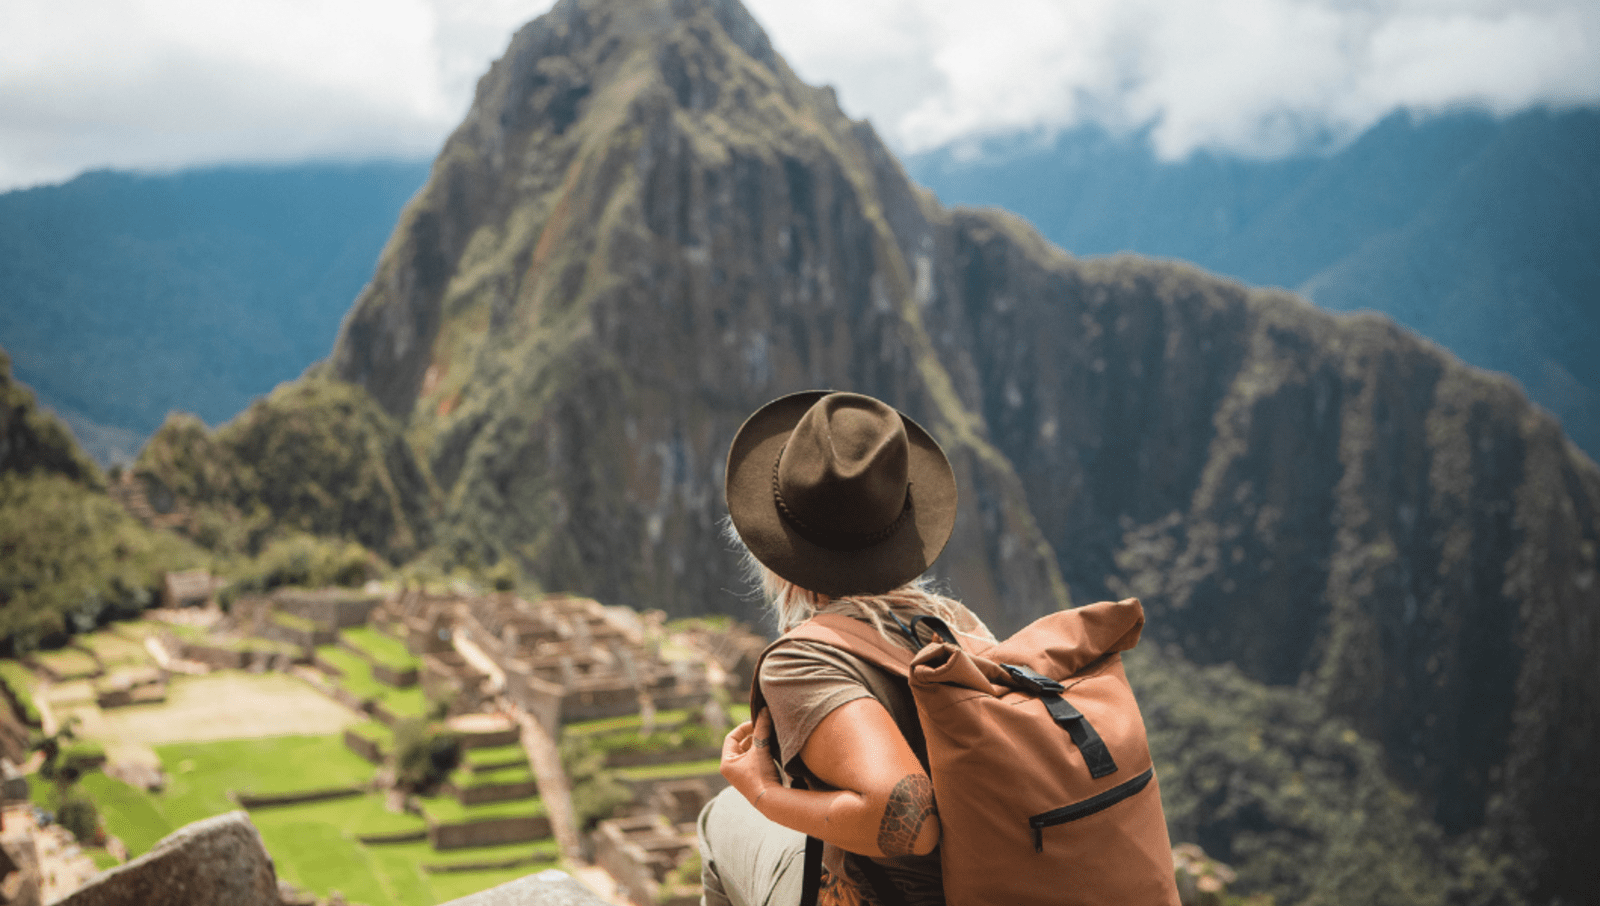 Tourist with hat and backpack standing on sliff overlooking maccu picchu